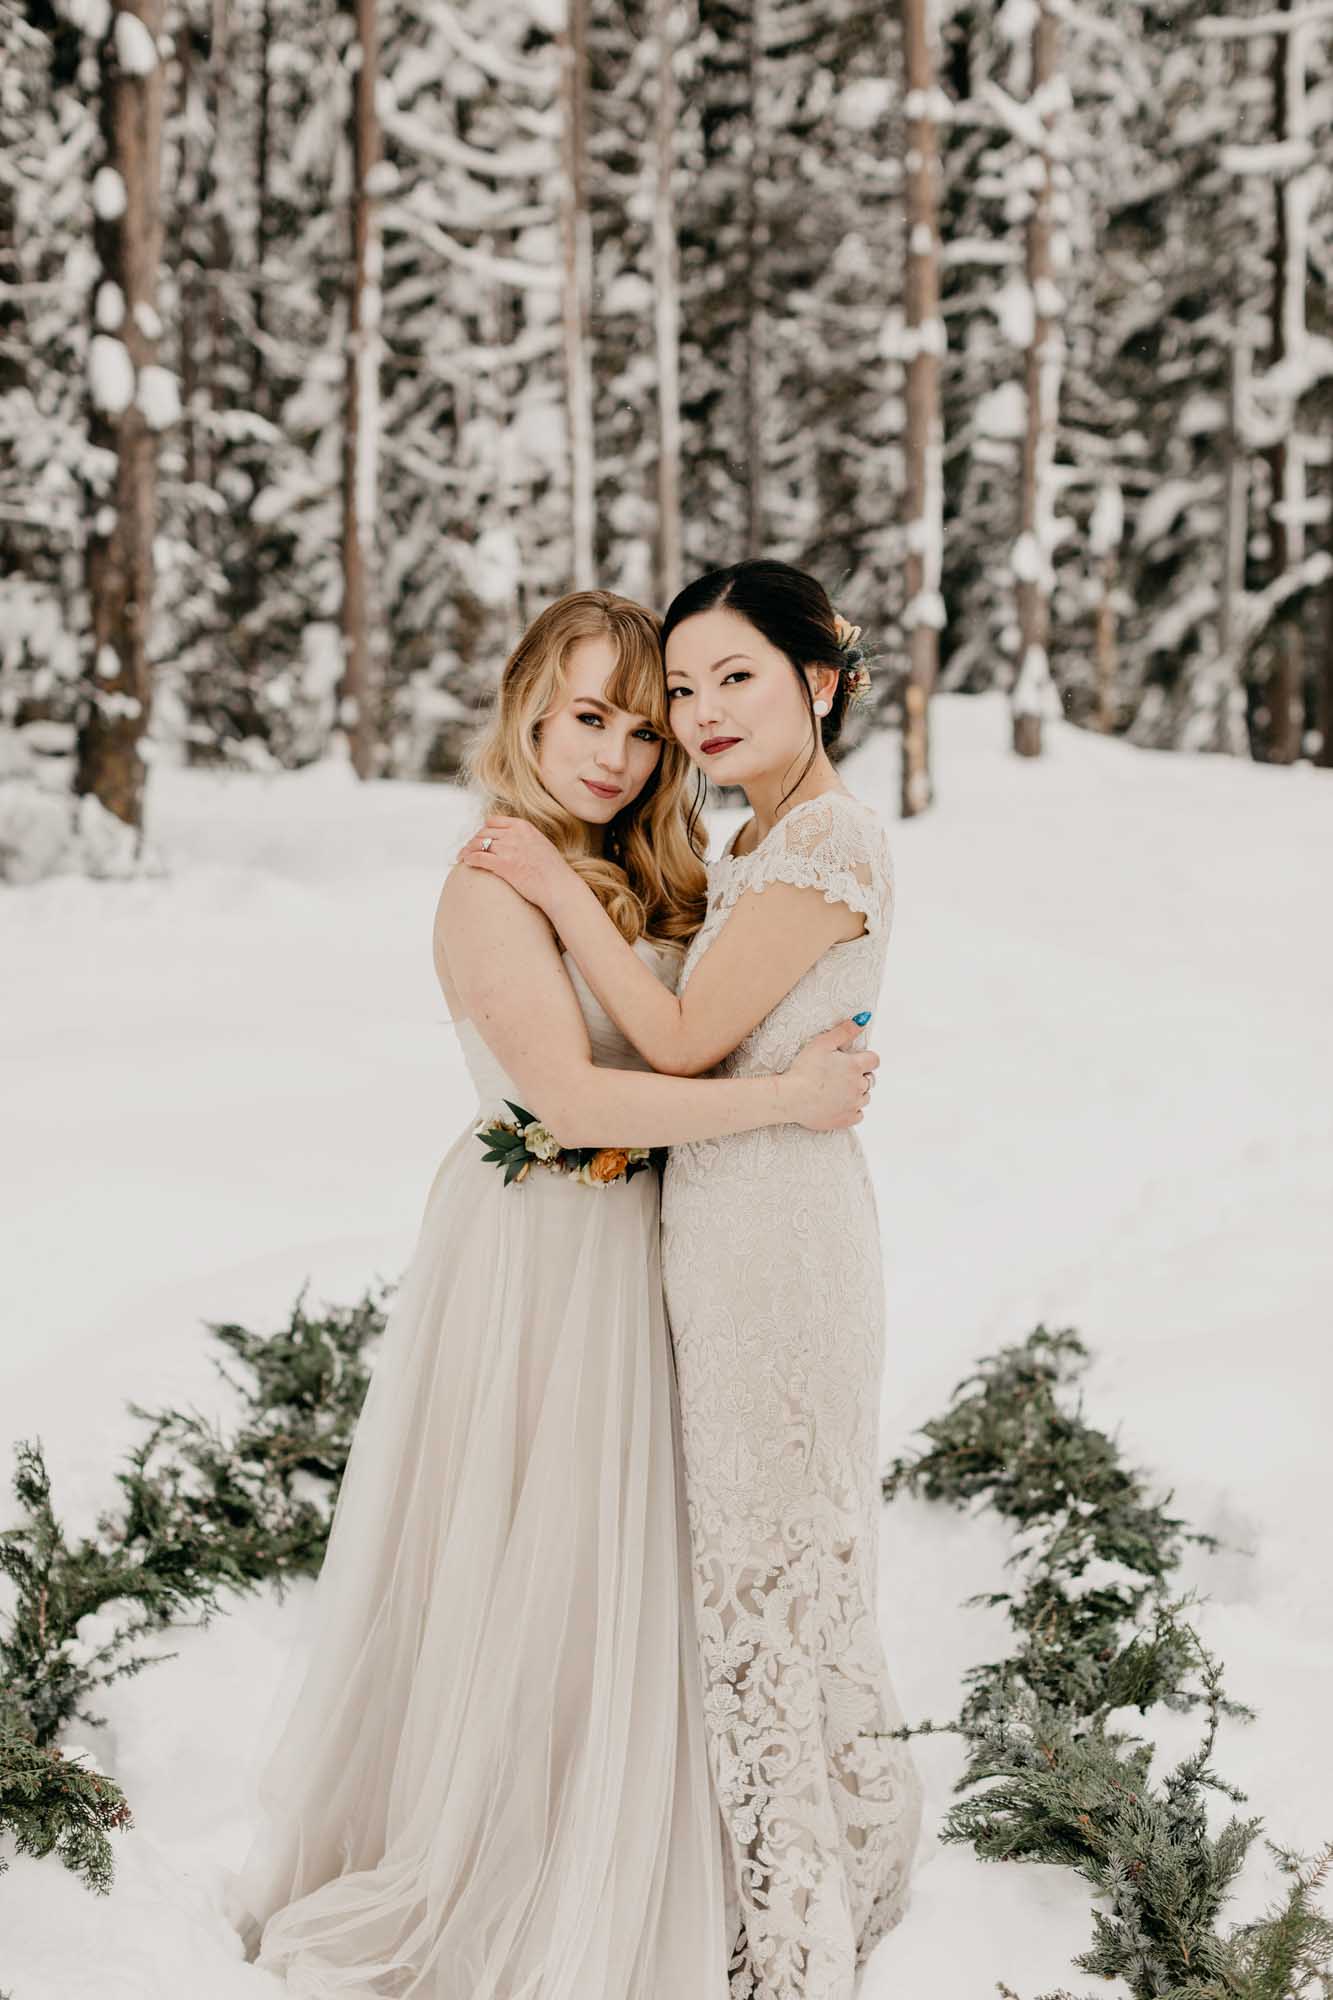 Outdoor winter wedding with sustainable elements | Lauren Miles | Featured on Equally Wed, the leading LGBTQ+ wedding magazine